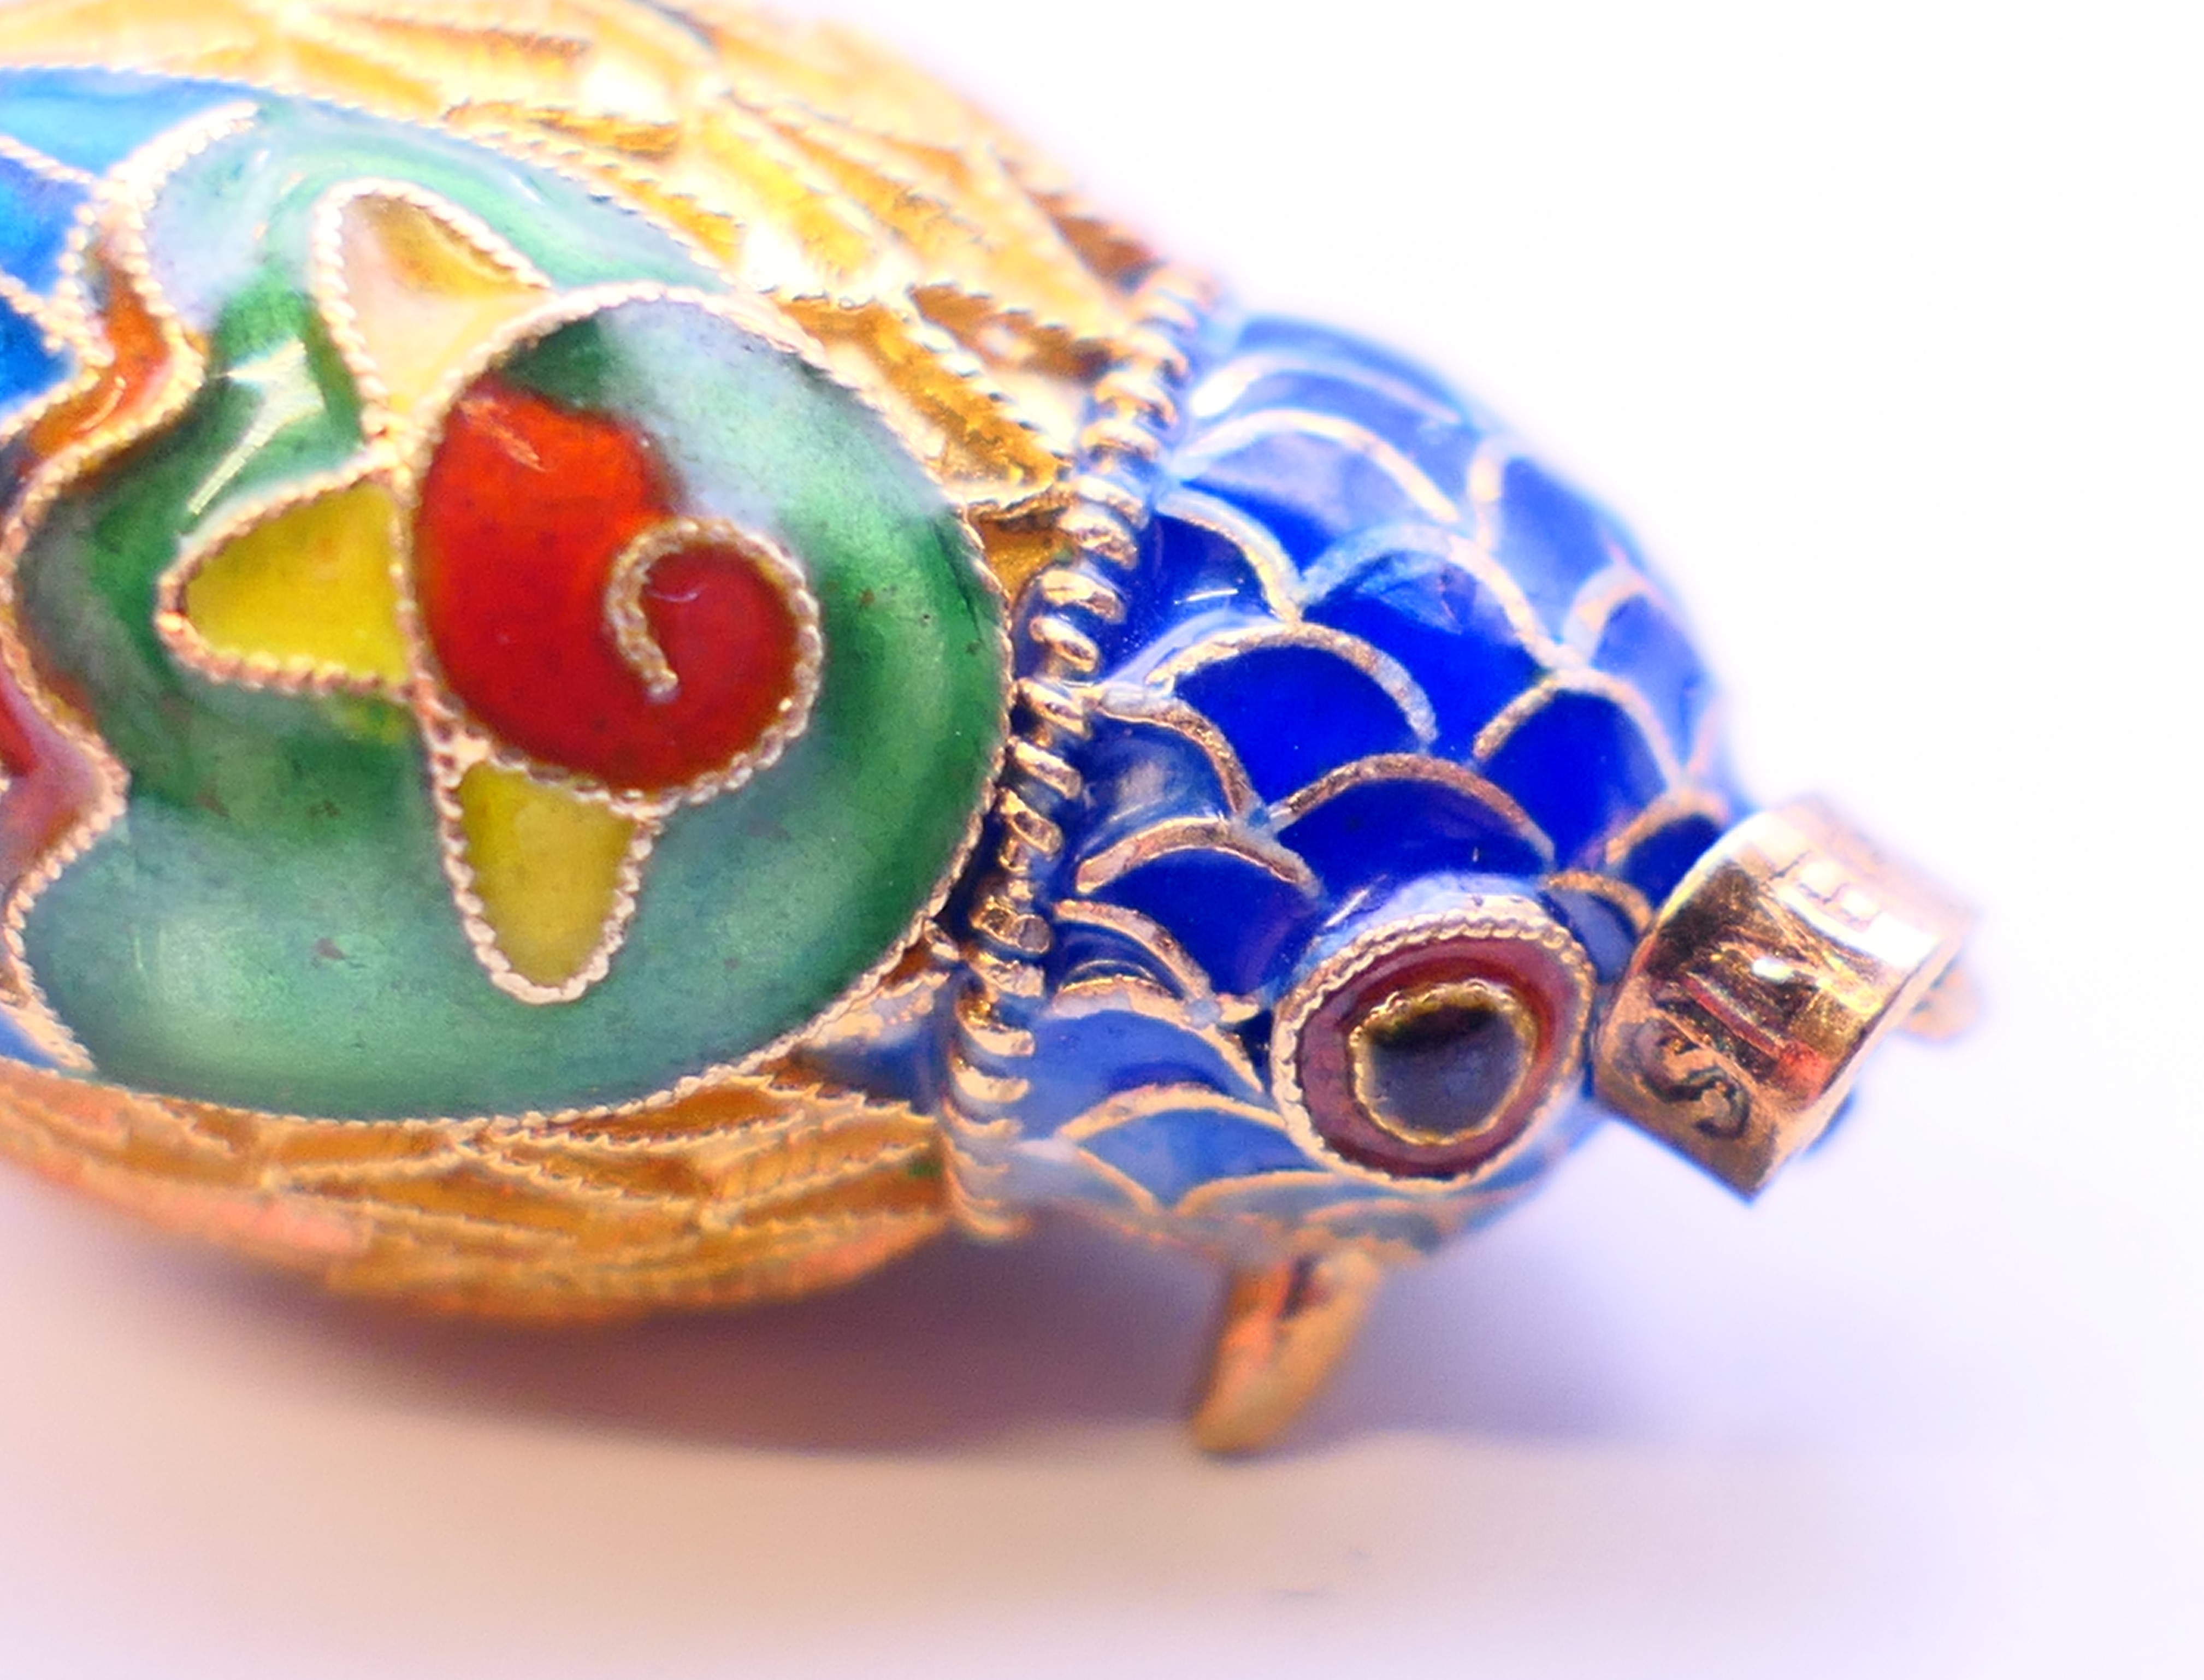 Two Chinese silver and enamel pendants. 4 cm high and 3 cm high. - Image 7 of 7